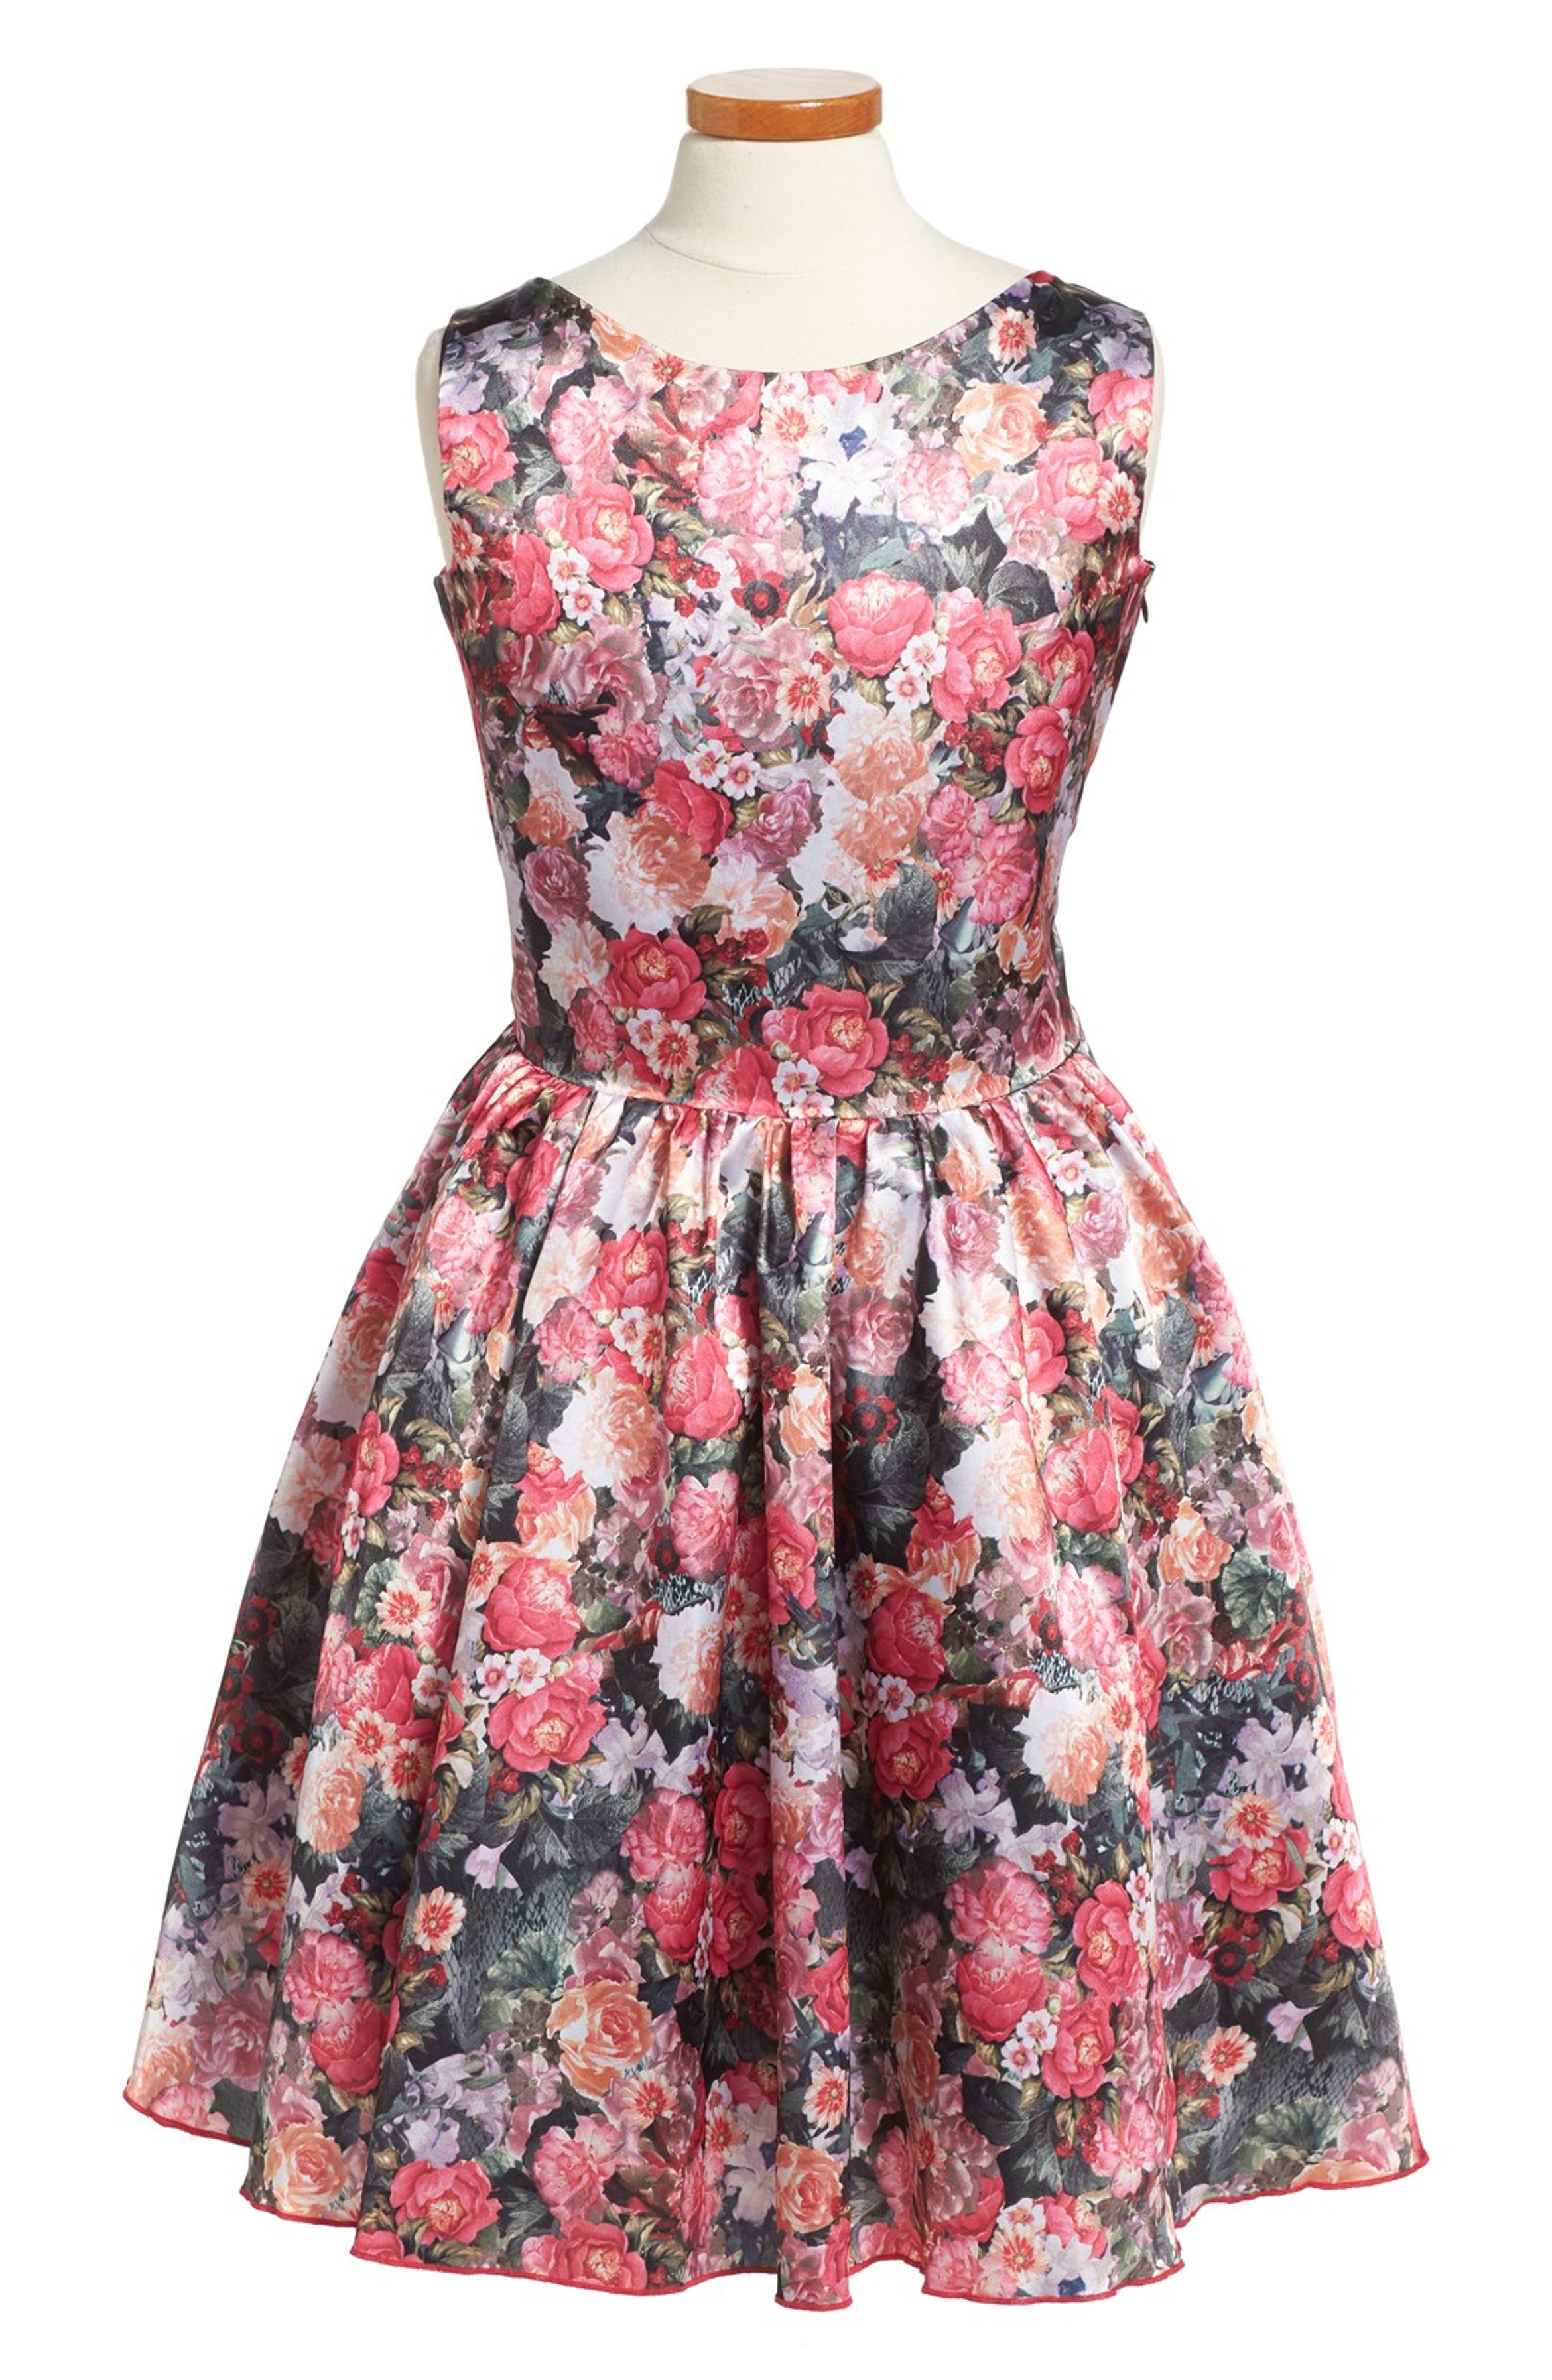 Fiveloaves Twofish 'Painted Lady' Floral Print Sleeveless Party Dress ...